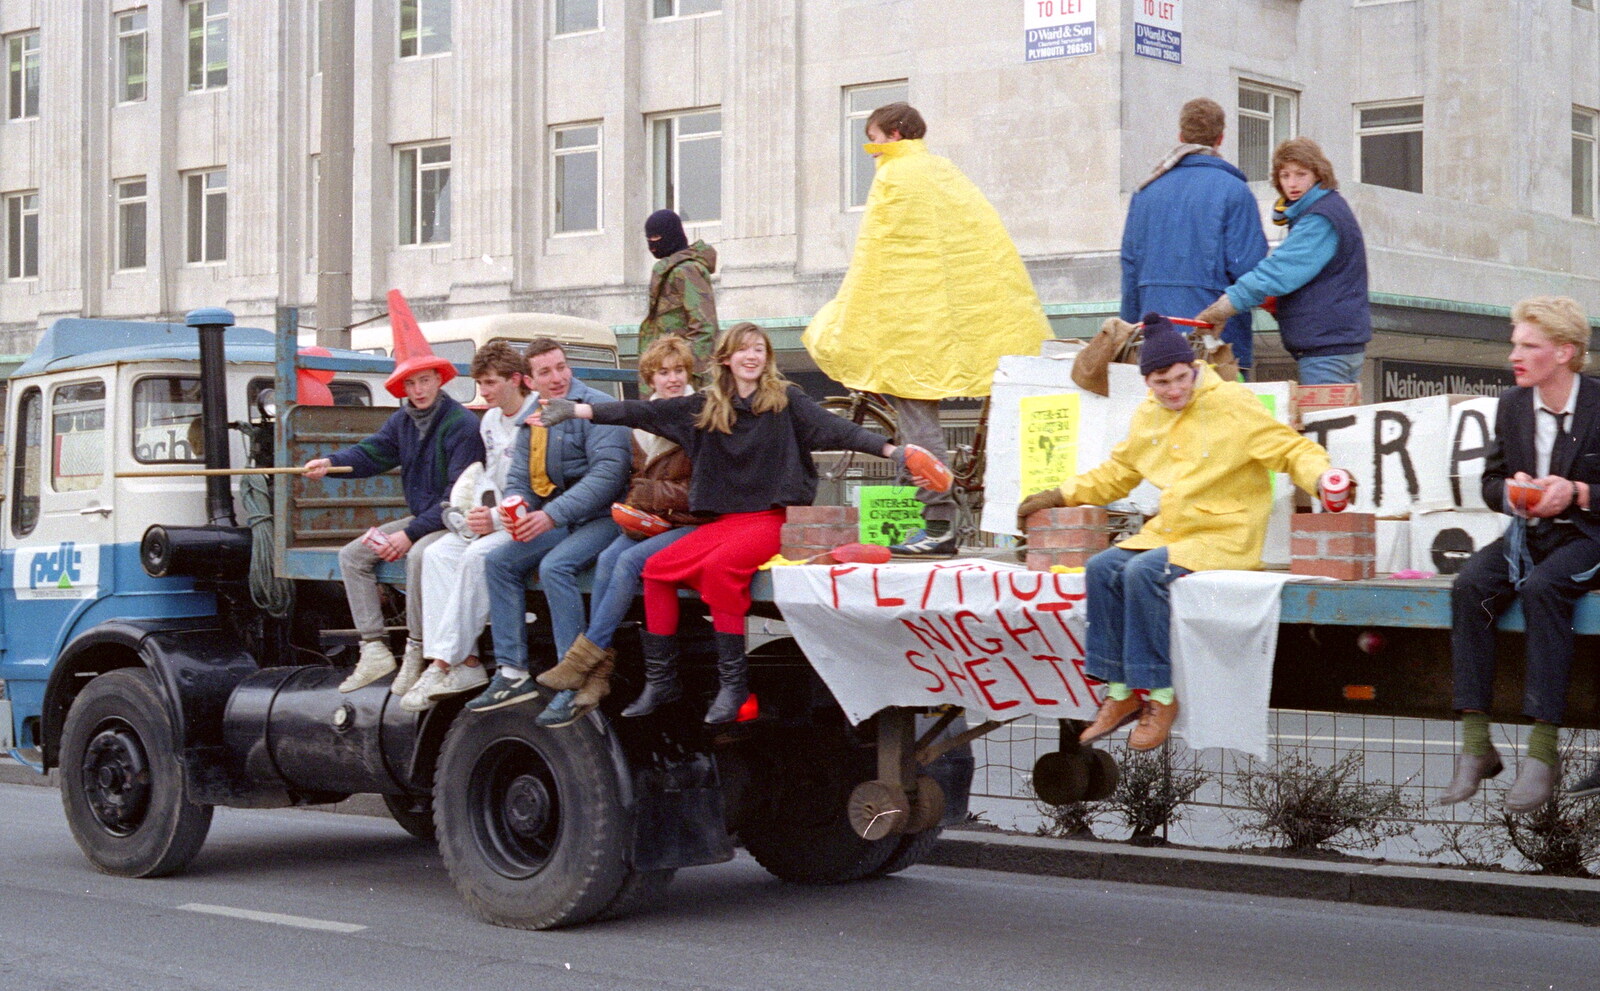 The Plymouth Night Shelter float from Uni: PPSU "Jazz" RAG Street Parade, Plymouth, Devon - 17th February 1986